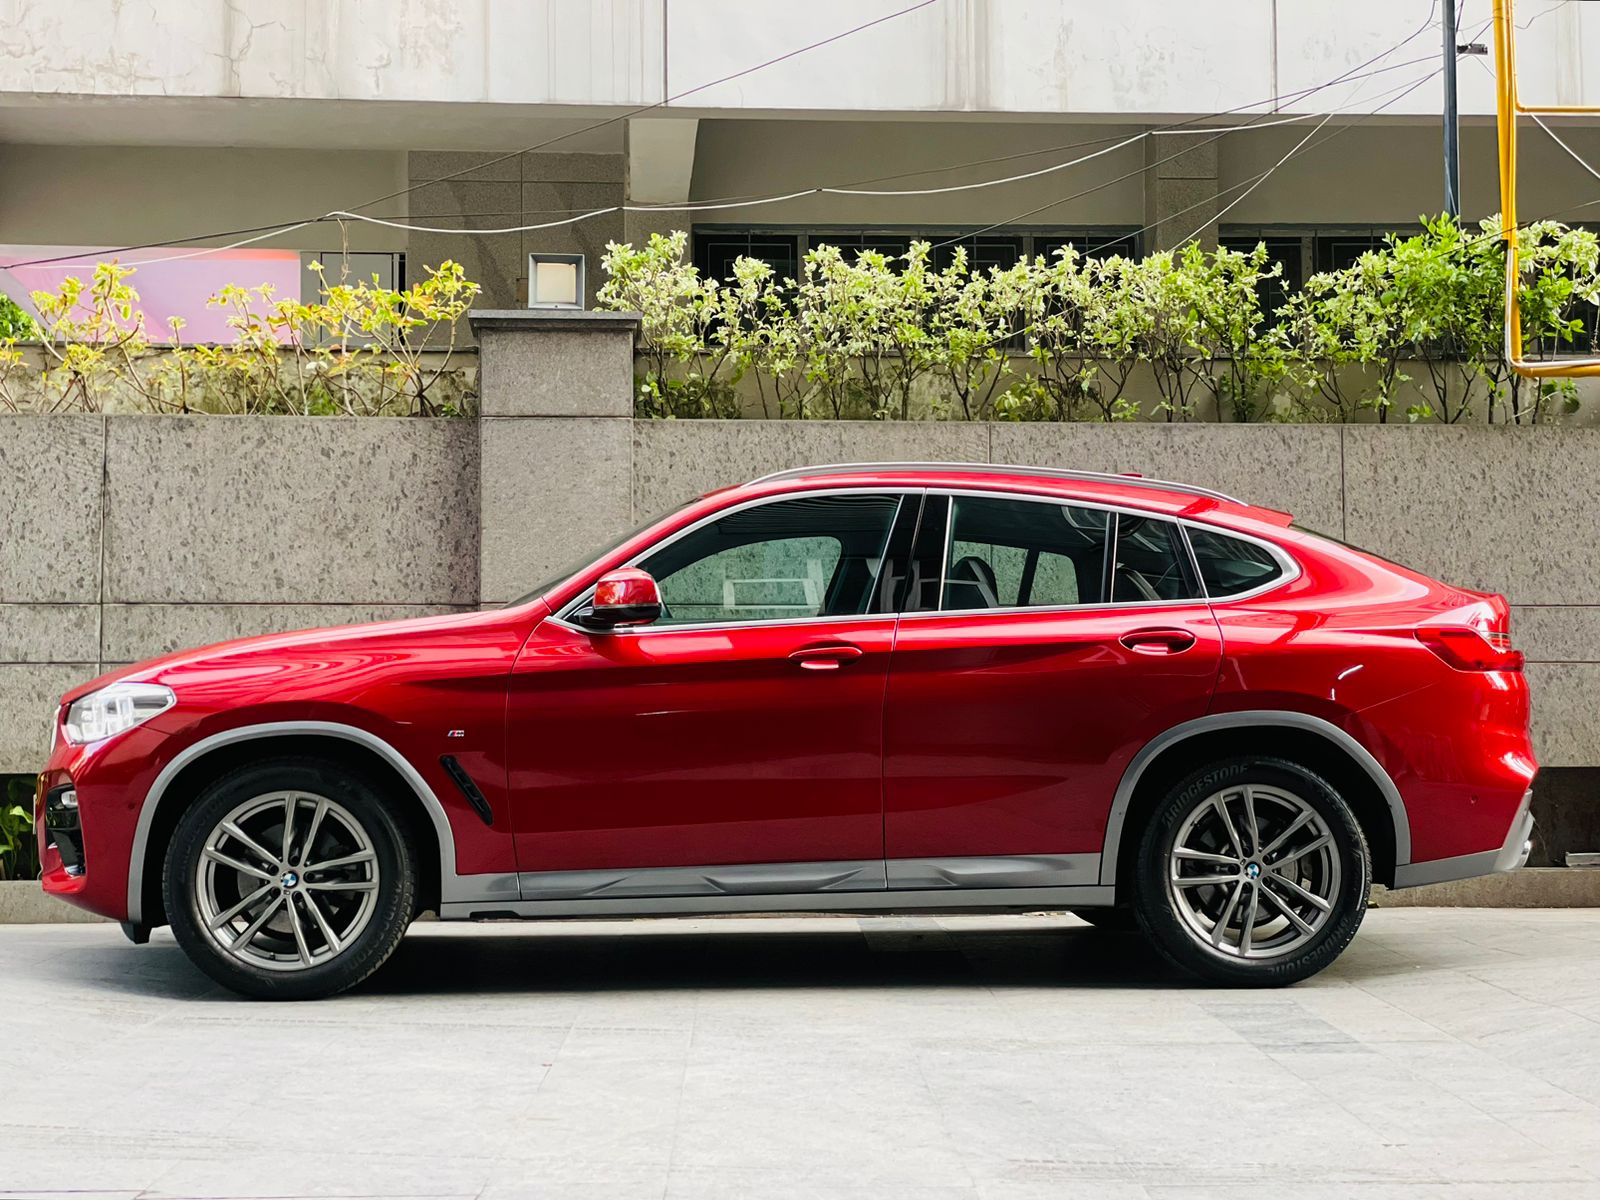 BMW X4 xDrive 20d M Sport X 2019: A Blend of Performance and Luxury